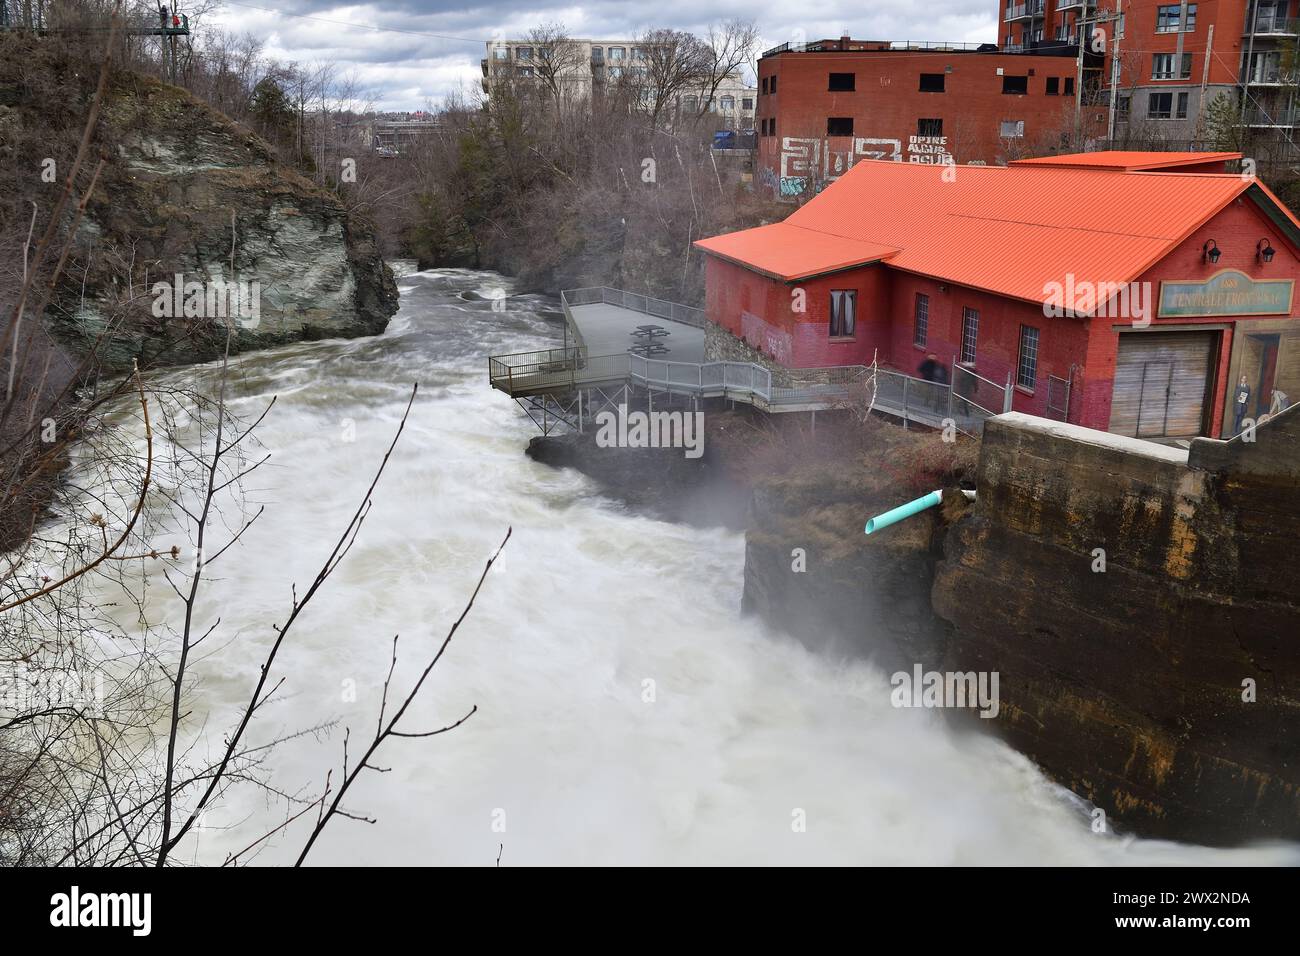 SHERBROOKE, QUEBEC, CANADA - April 16, 2022: Magog river rushing water Frontenac hydroelectric power plant early spring Stock Photo